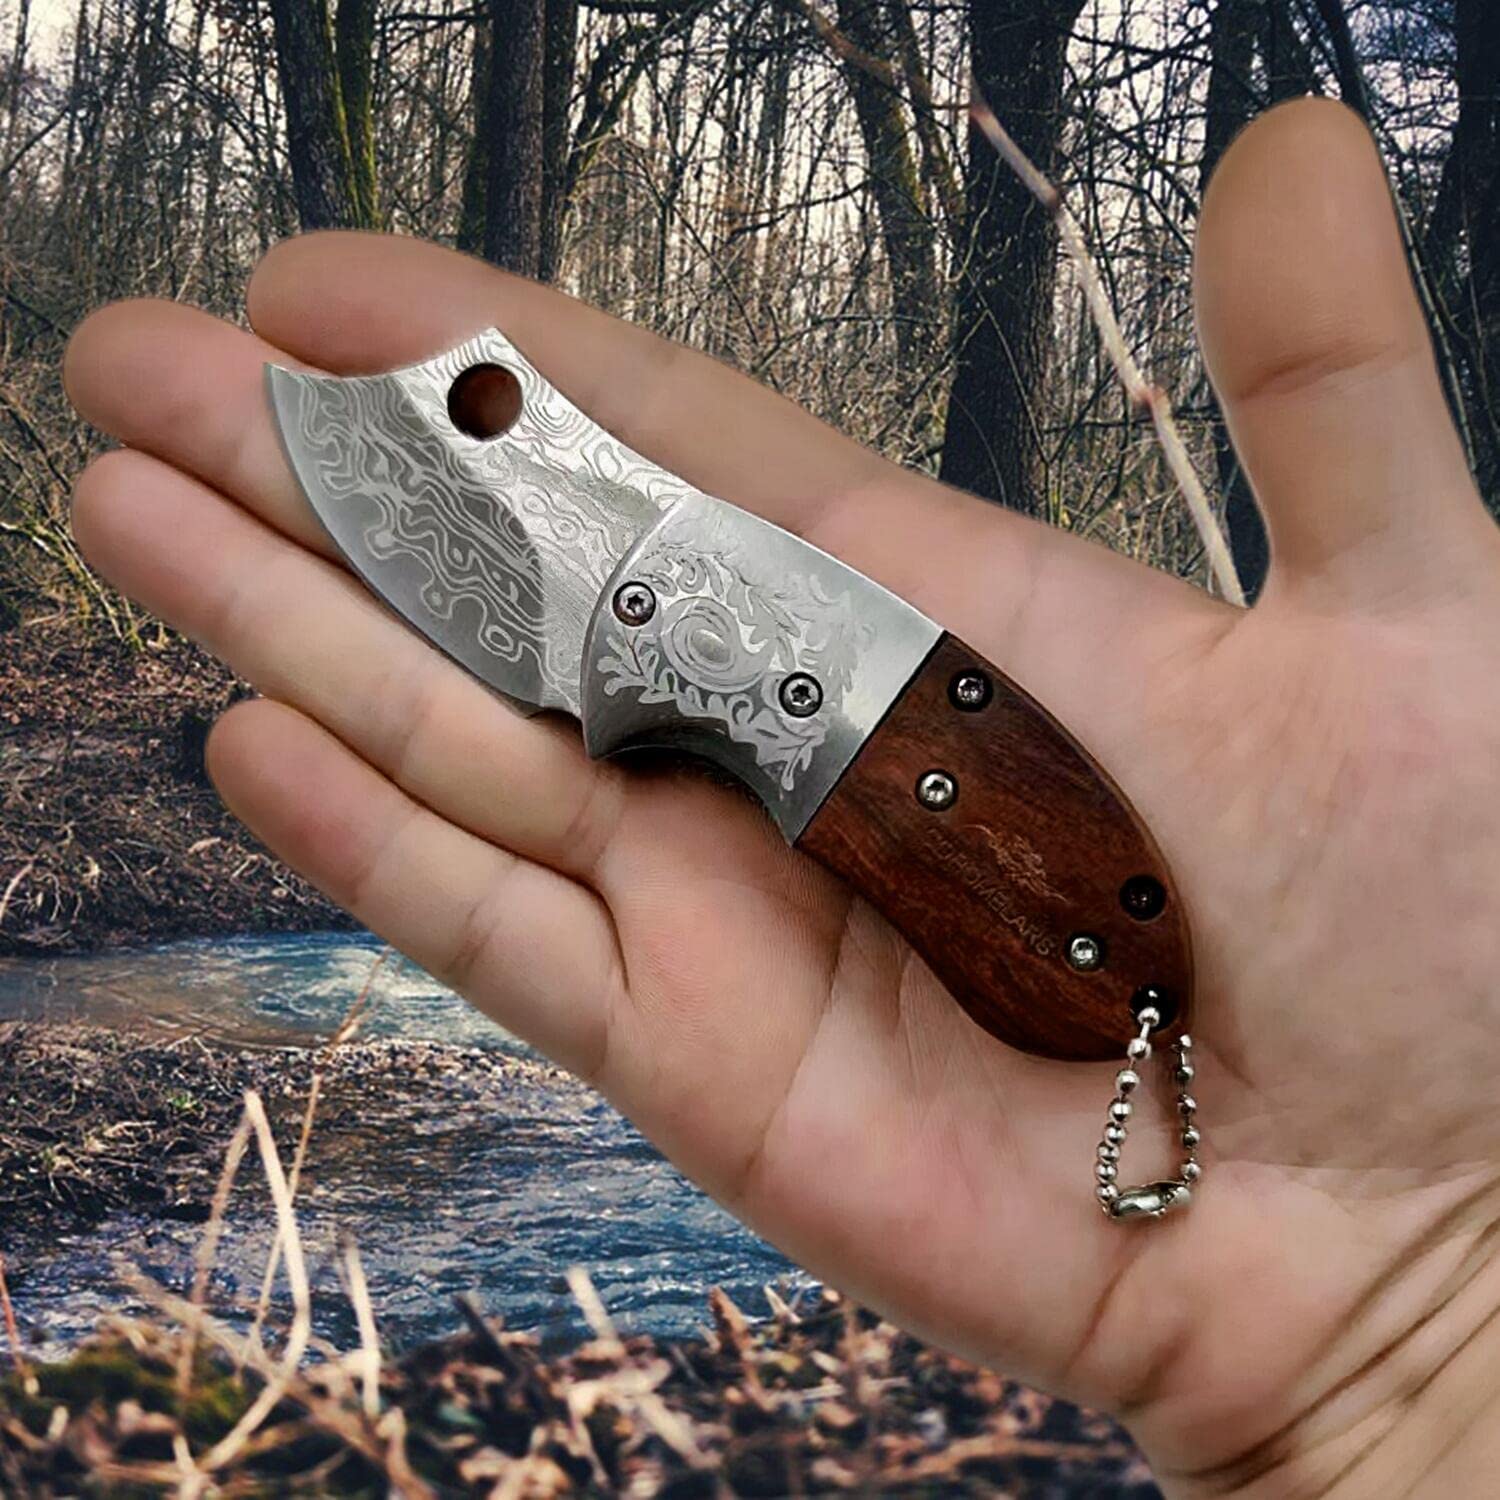 COHOMELARS Small Folding Pocket knife,Stainless Steel 1.75inch Blade,Wood Handle,Liner Lock Mini Knife for Everyday Carry,EDC Little Cute Knives for Women Men (Brown style 2)